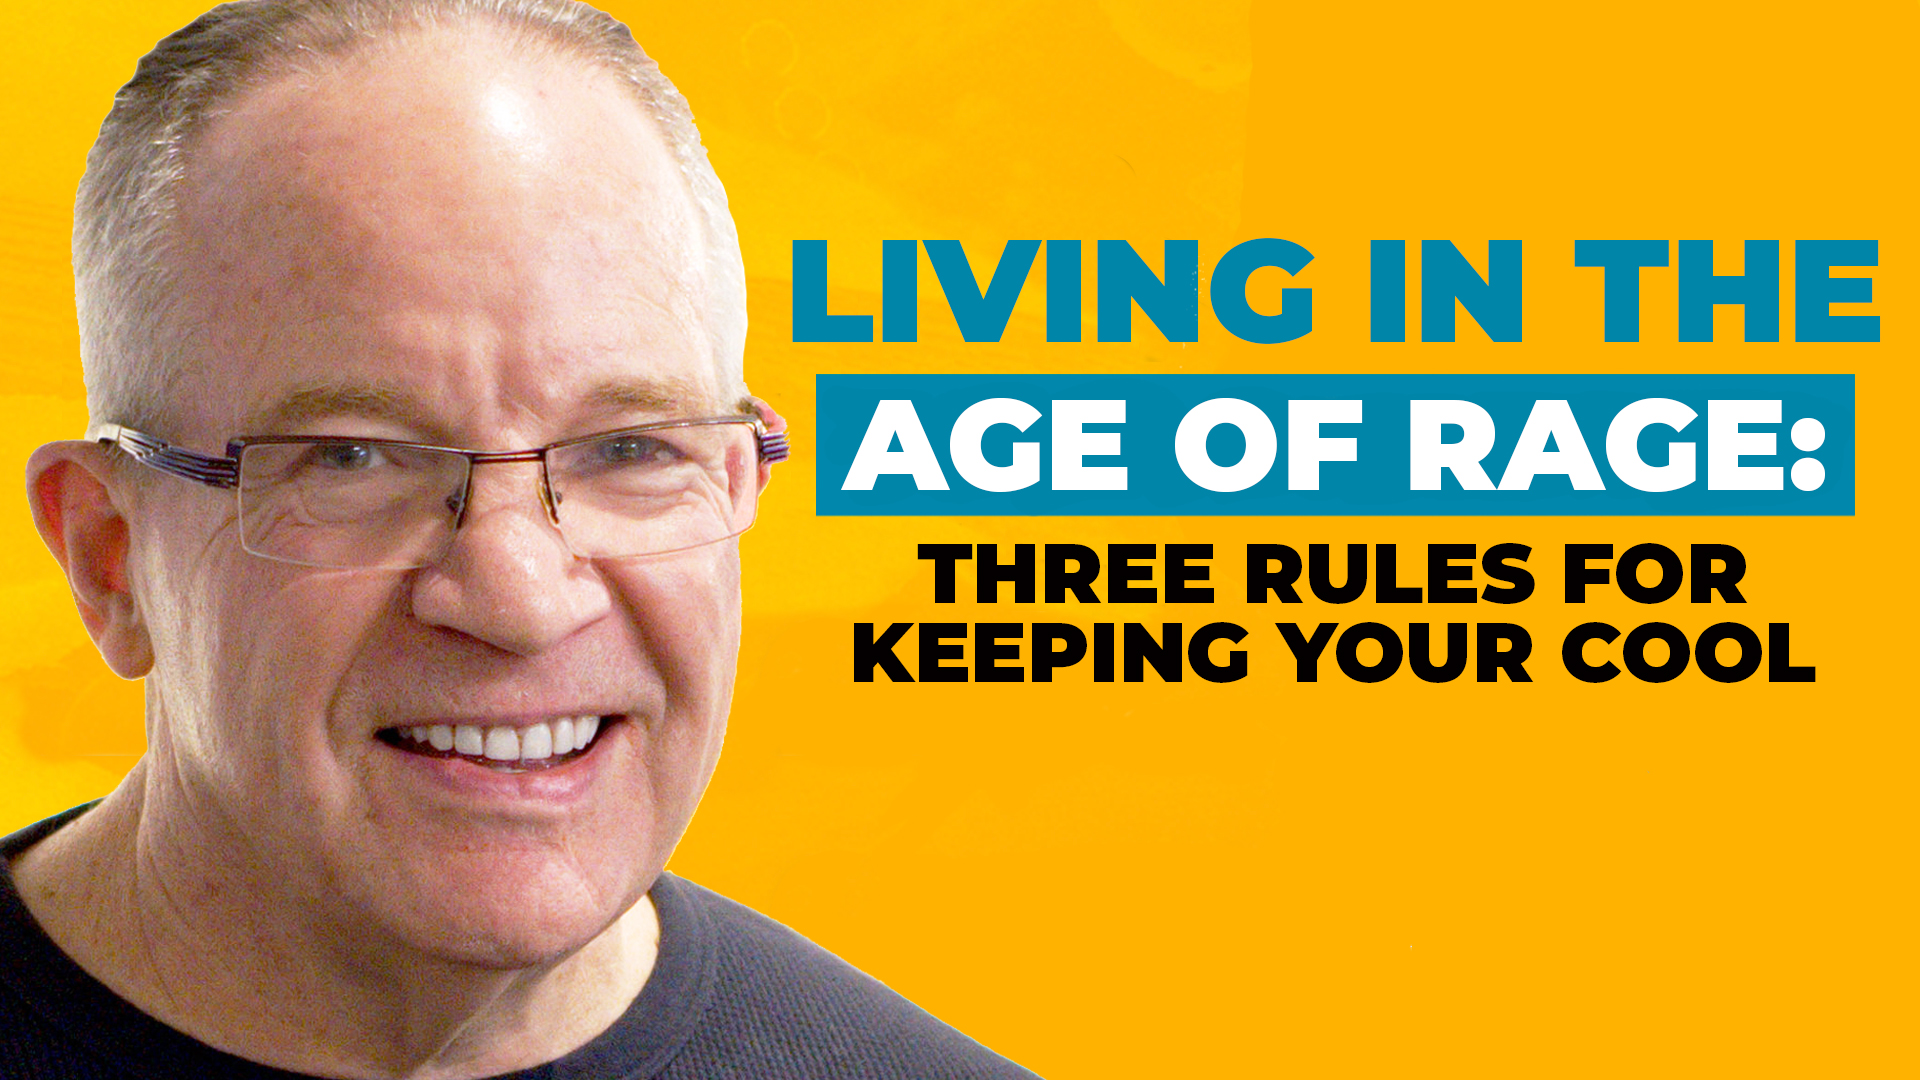 A headshot of Dan Sullivan on a bold yellow background, along with text reading "Living in the Age of Rage: Three Rules for Keeping Your Cool"